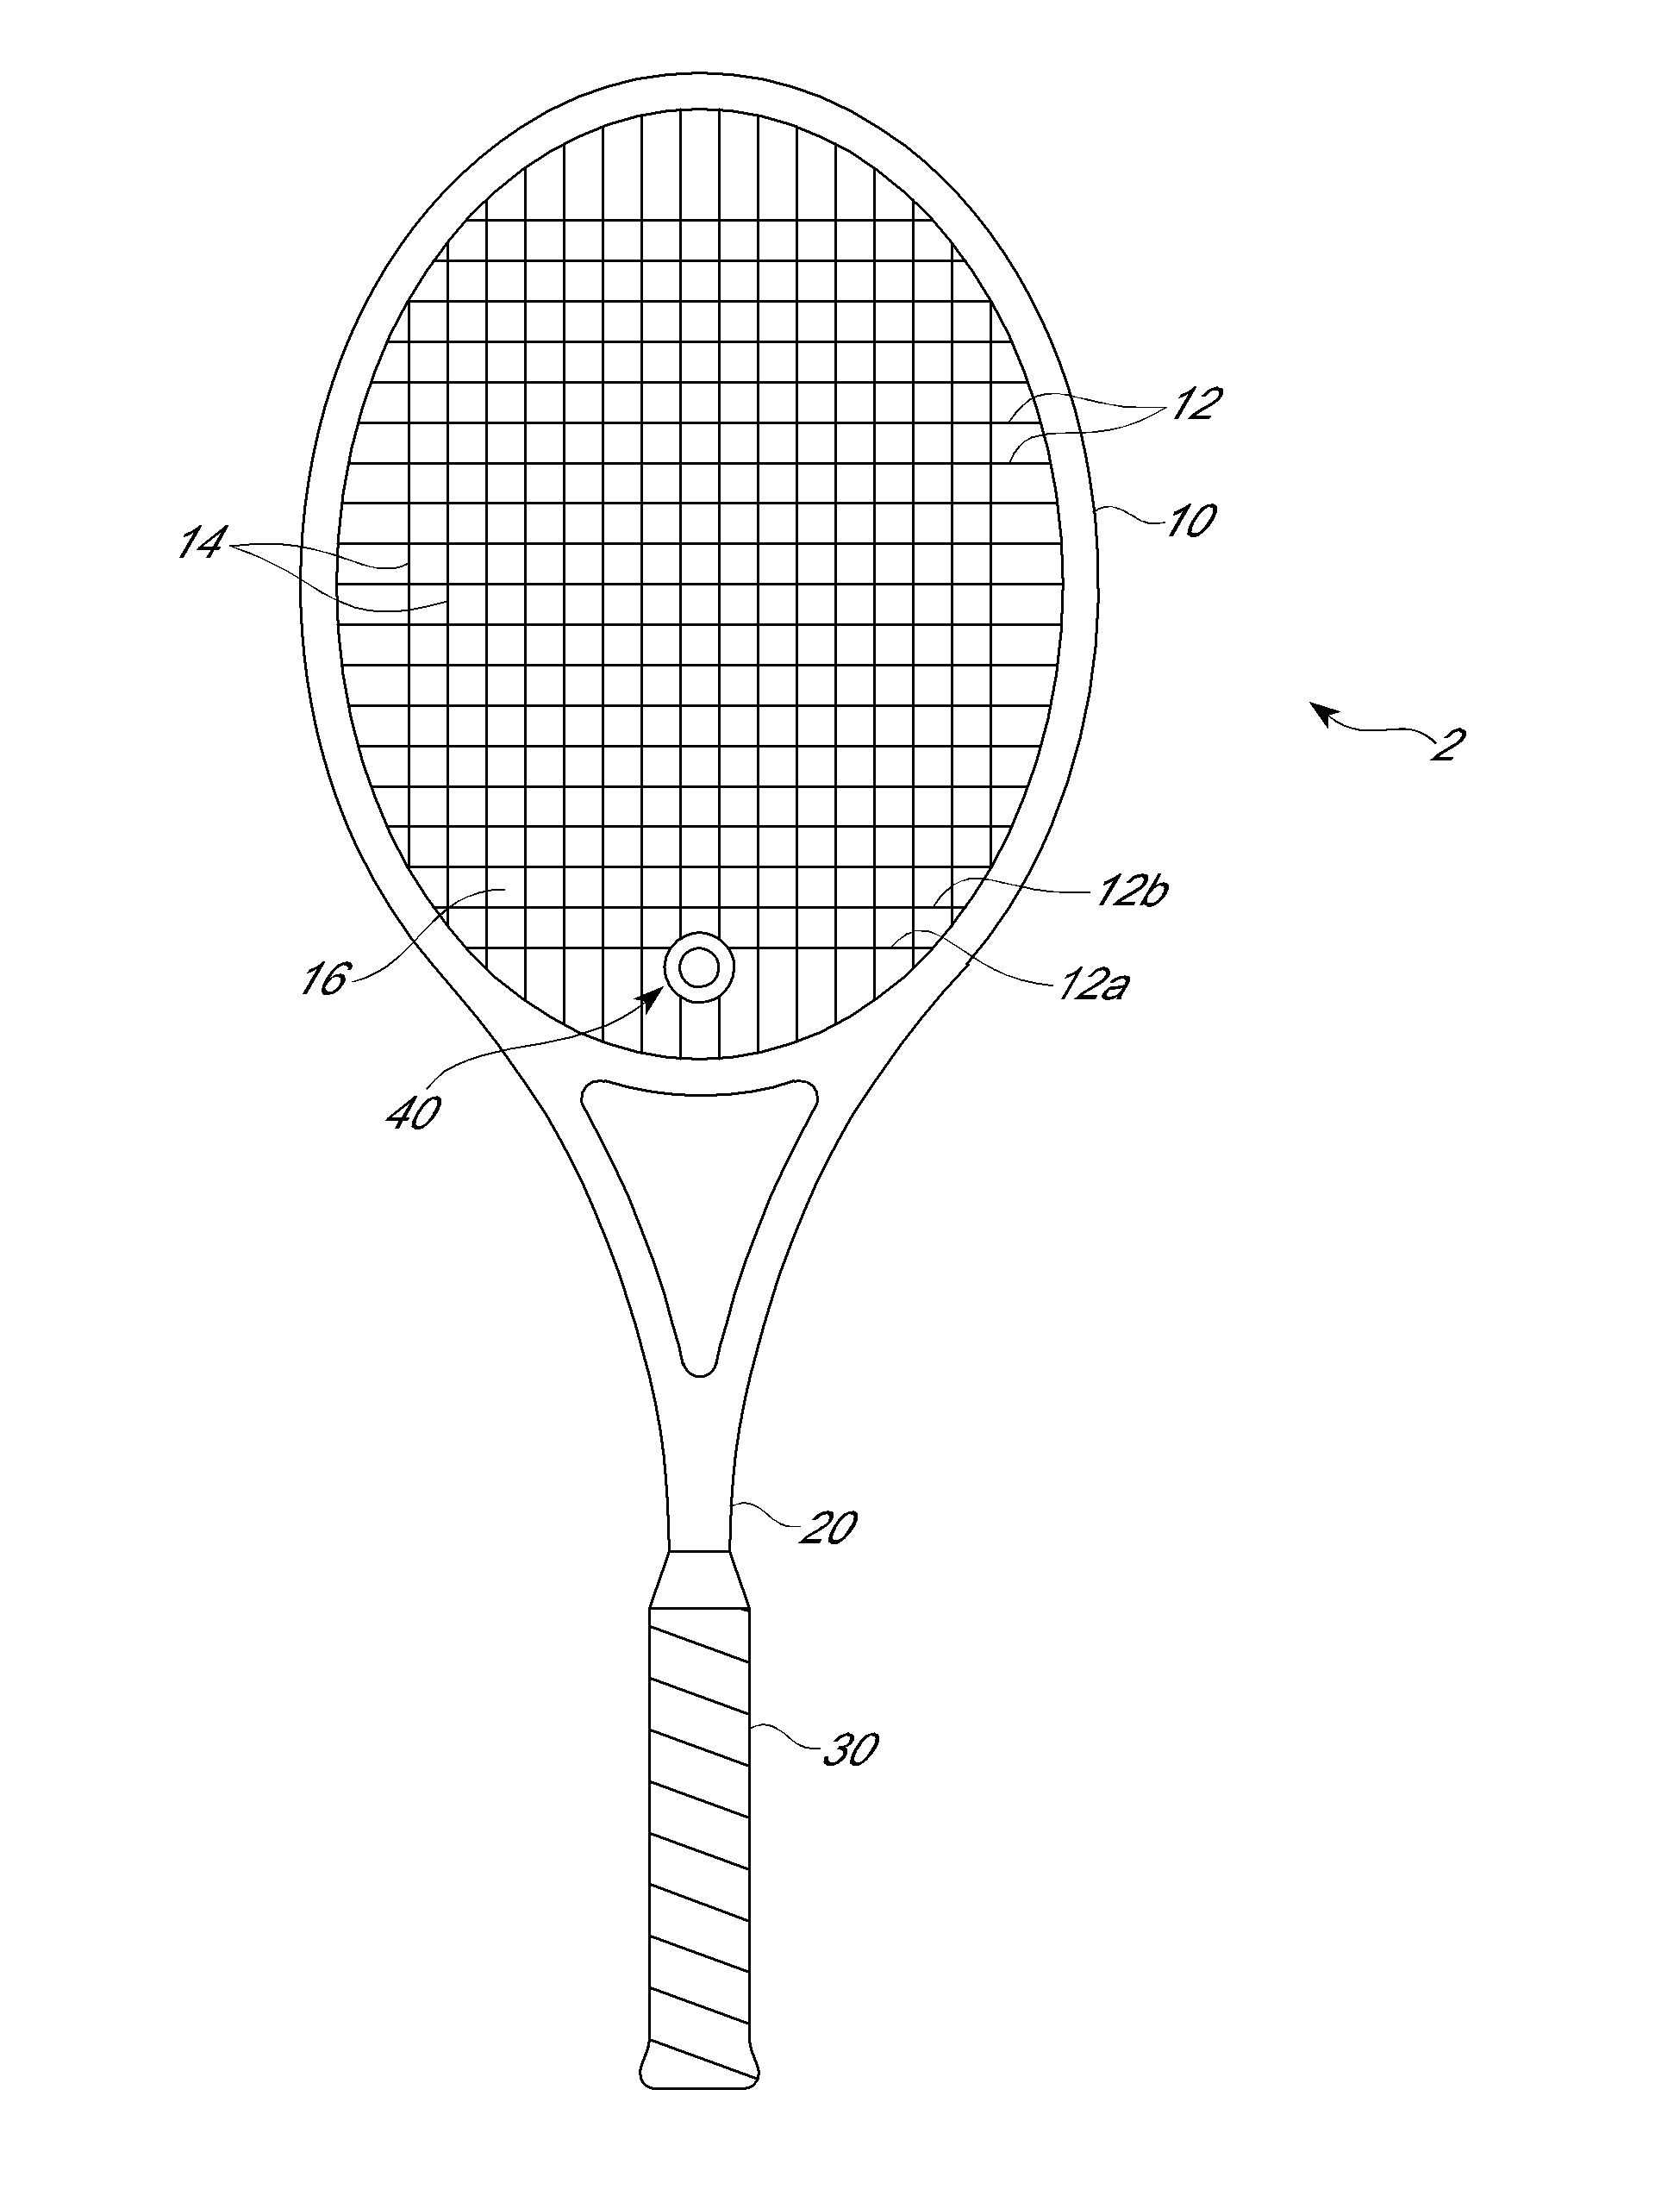 Device and method for improved tennis racket damping and weight adjustment